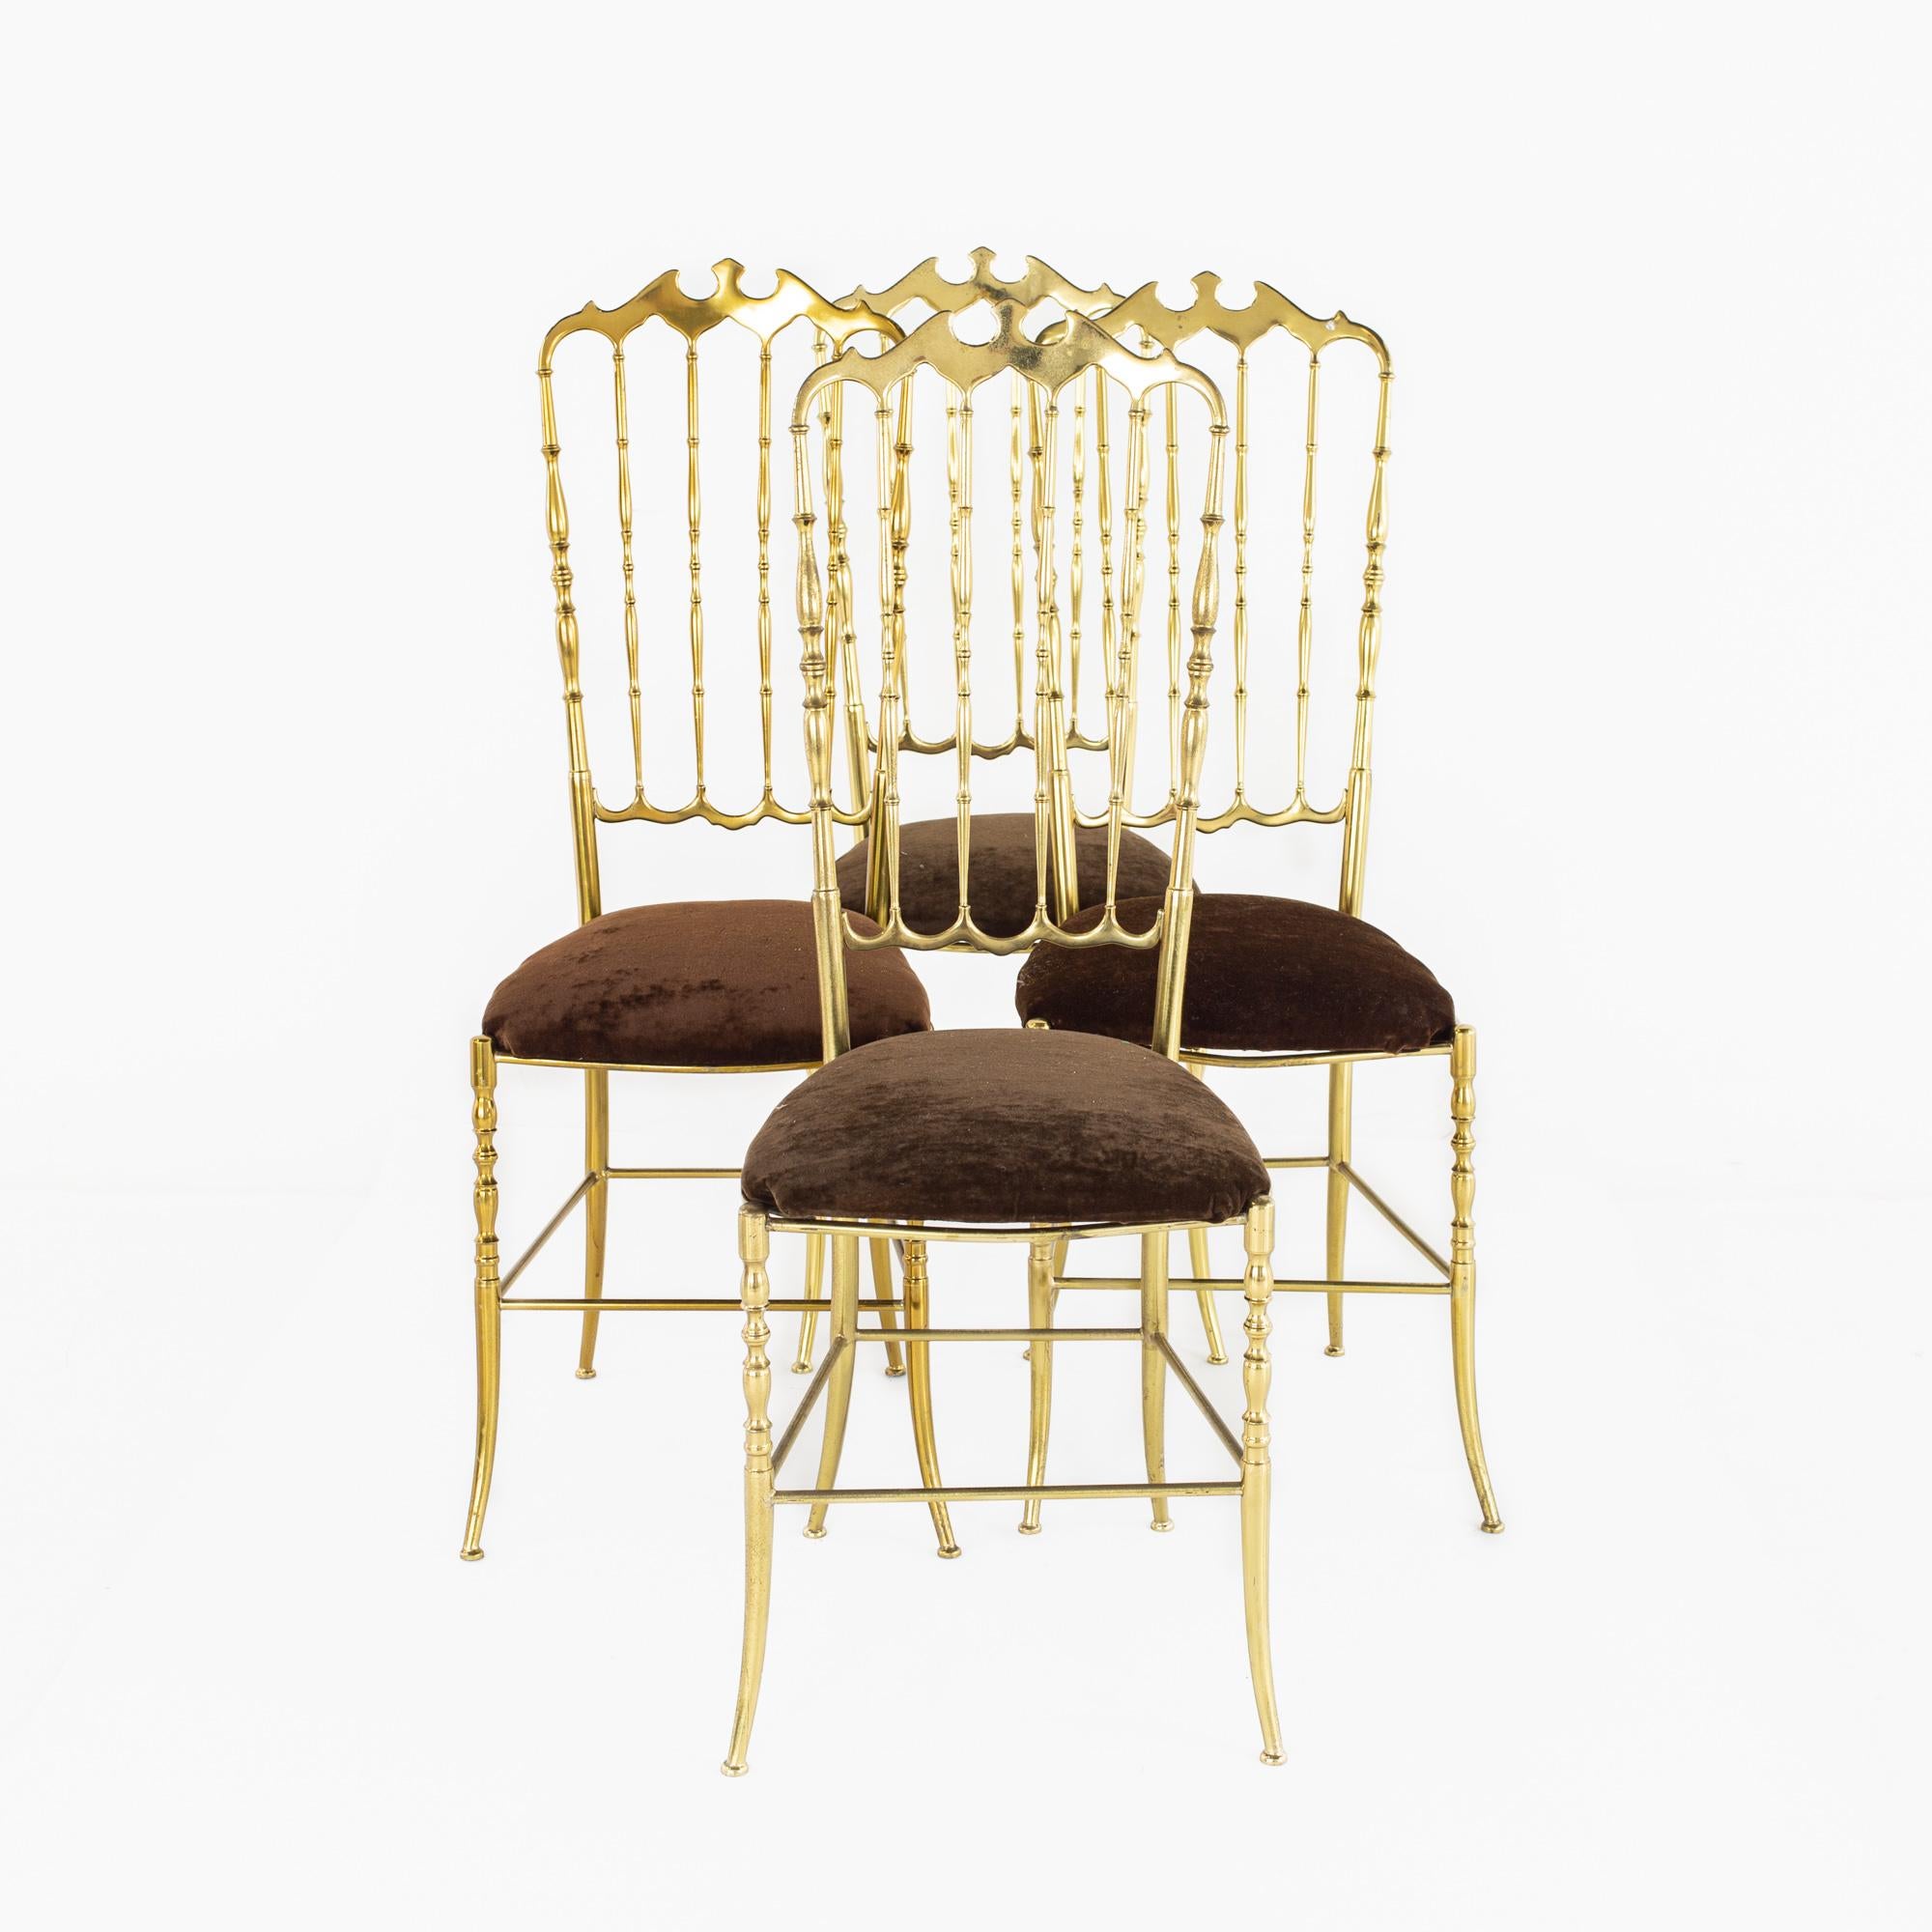 Chiavari Mid Century Italian Solid Brass Dining Chairs - Set of 4

Each chair measures: 15 wide x 17.25 deep x 40 inches high, with a seat height of 17.75 inches

All pieces of furniture can be had in what we call restored vintage condition.